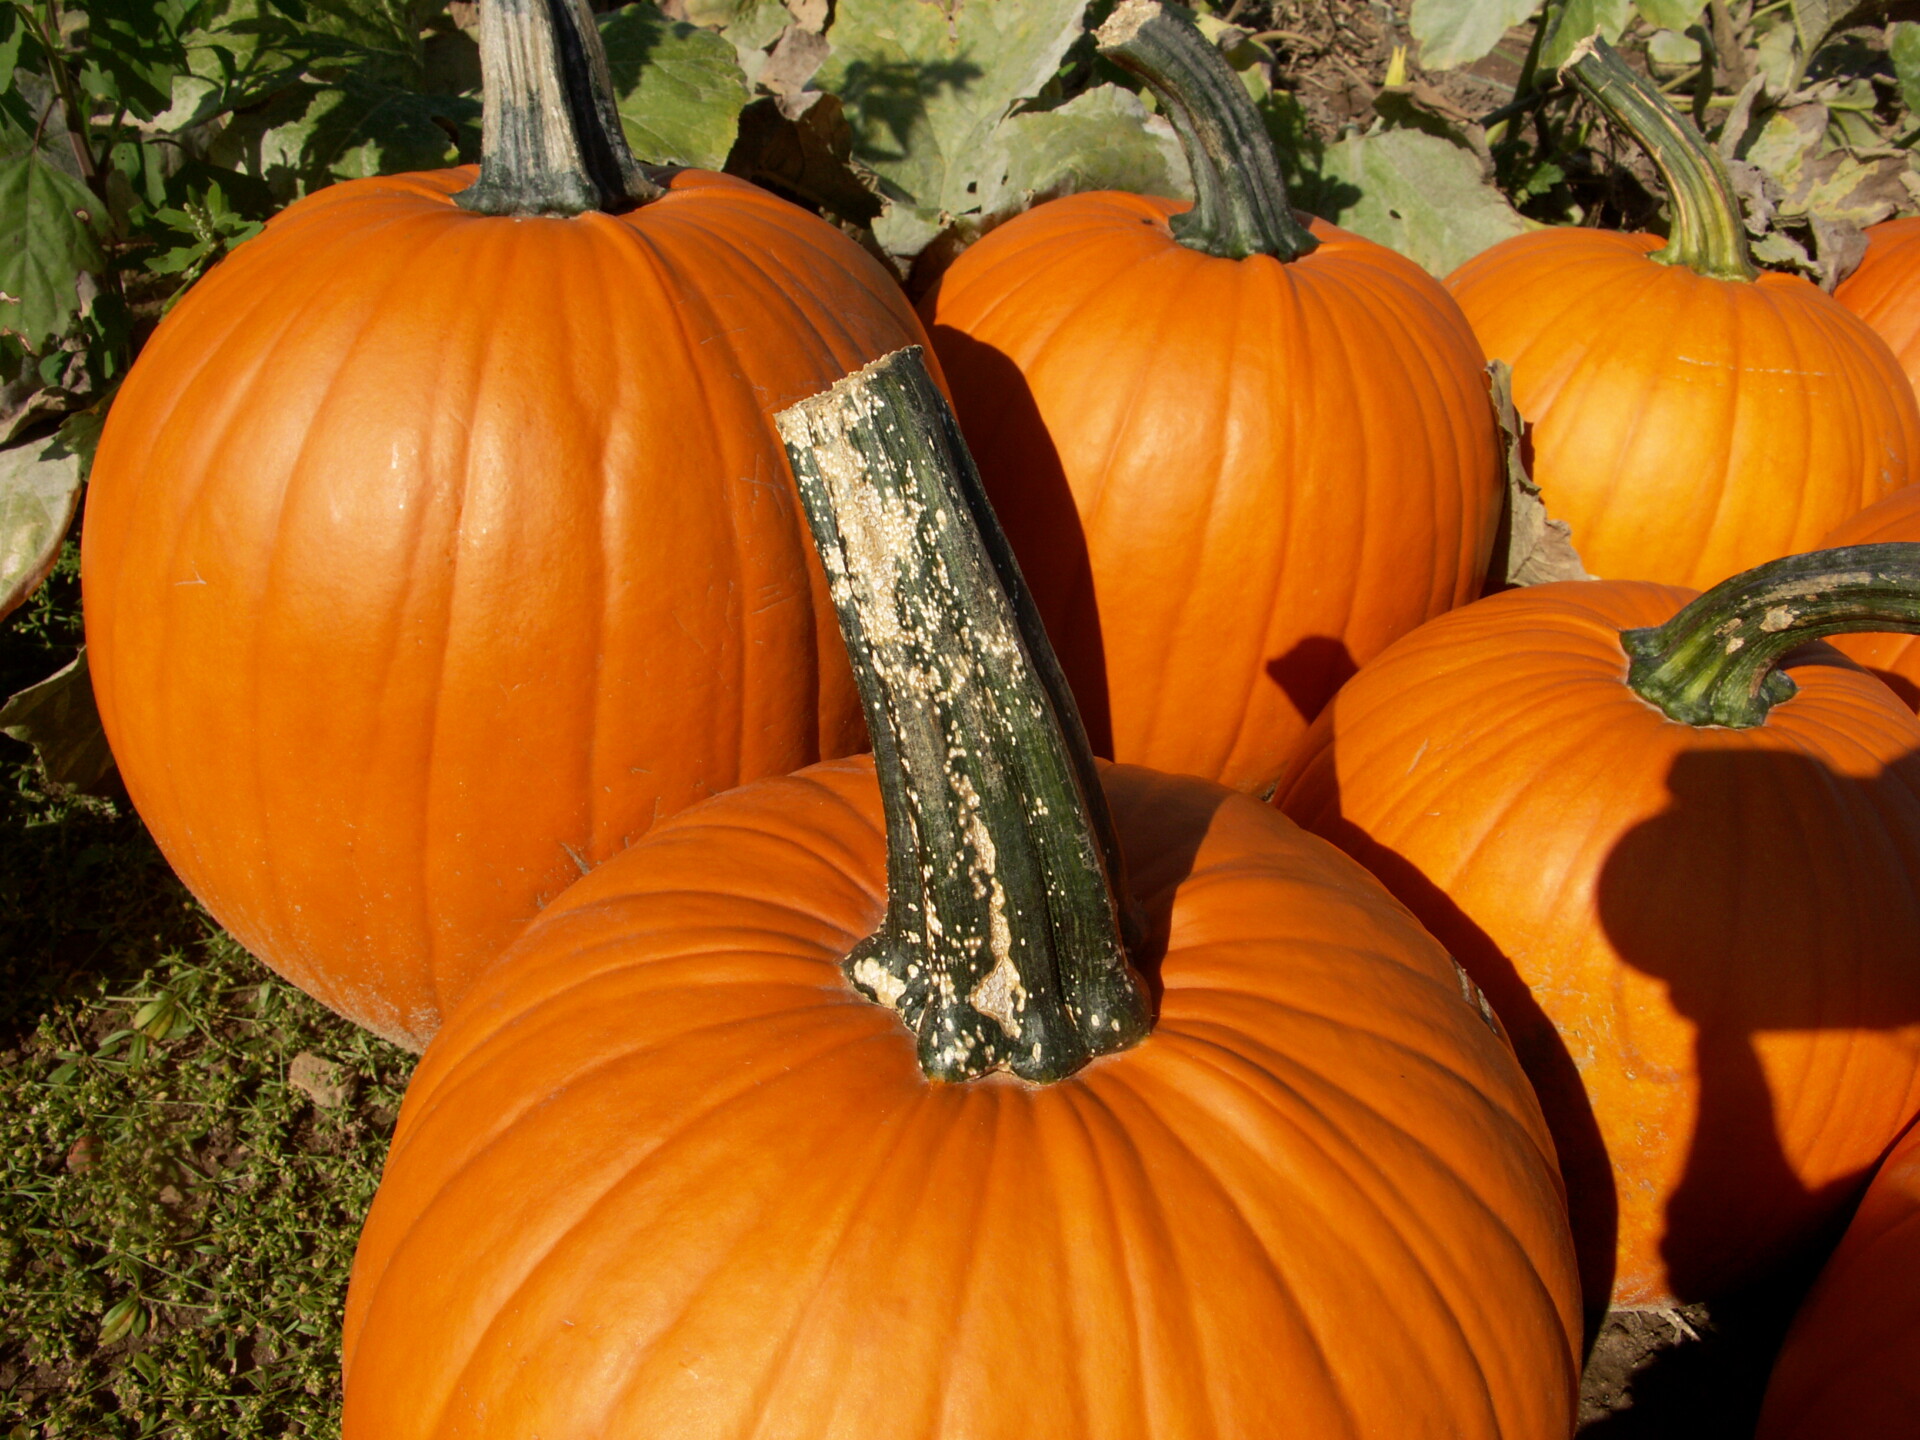 Plectosporium blight of pumpkin. Lesions are most common on the handle or lower stem.